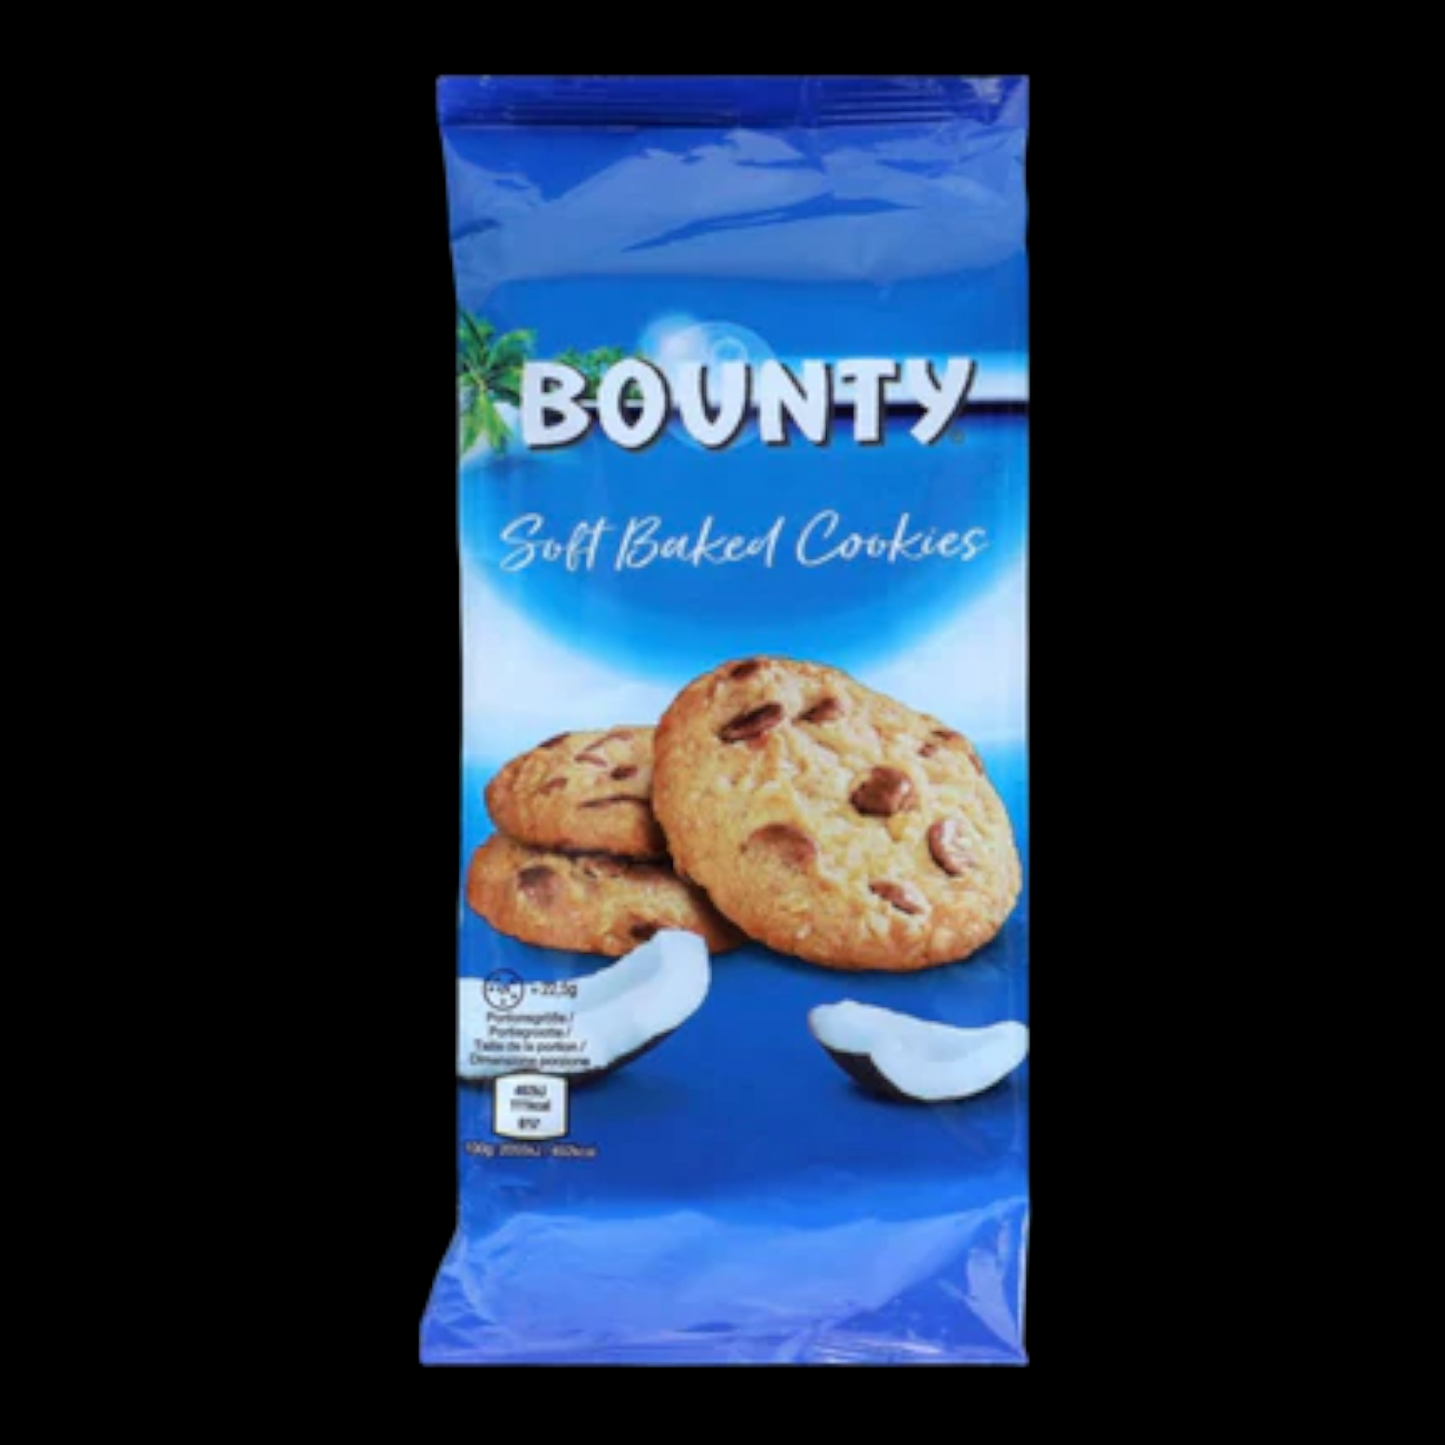 Bounty Soft Baked Cookies 180g